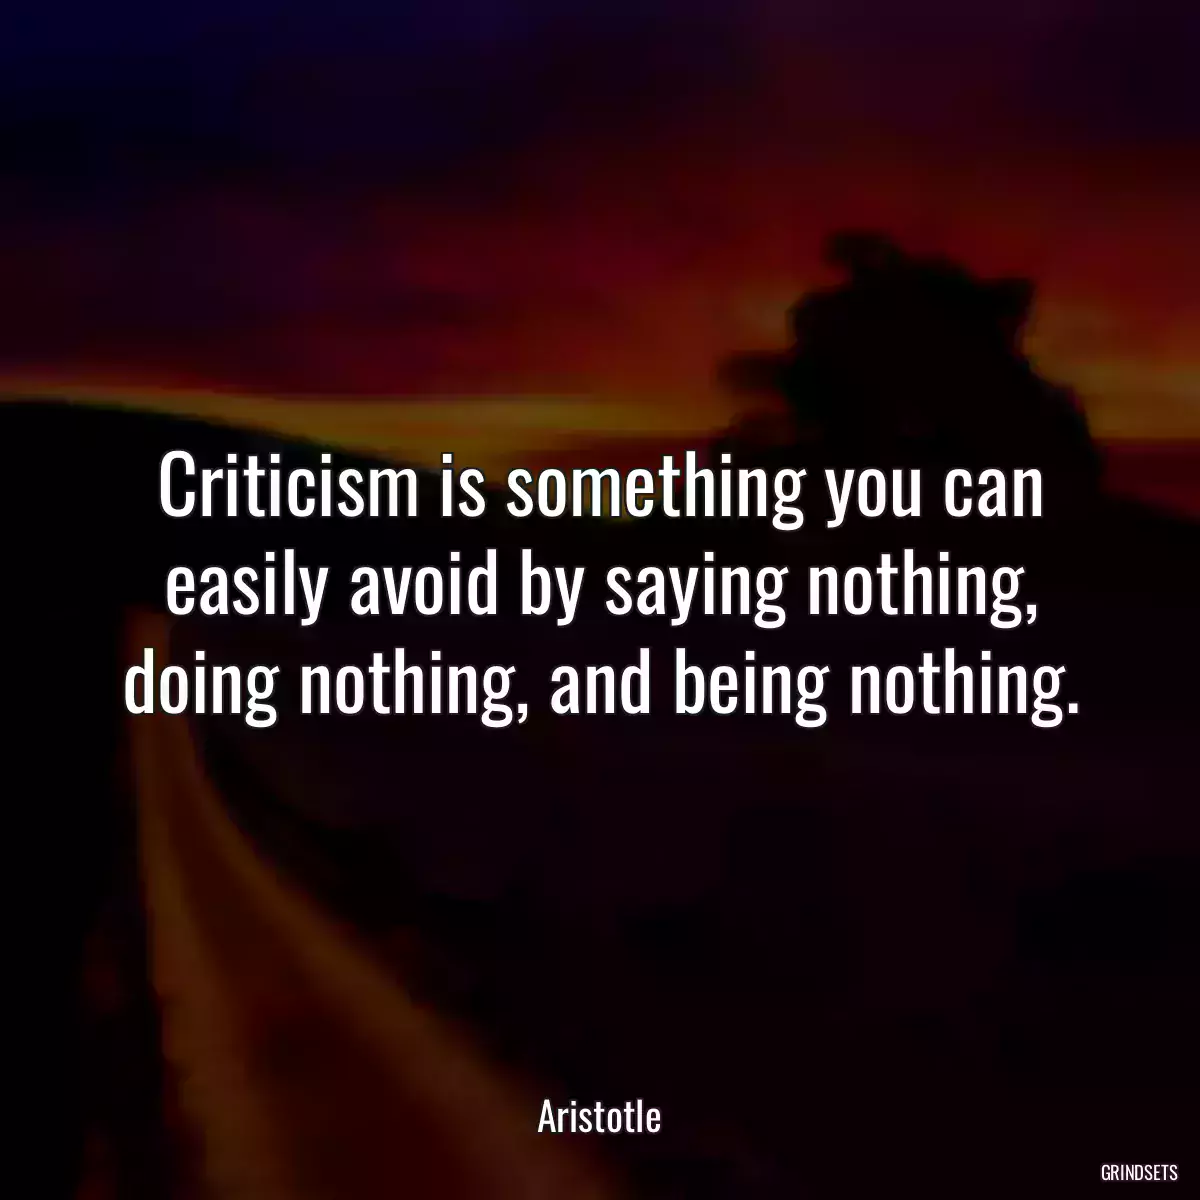 Criticism is something you can easily avoid by saying nothing, doing nothing, and being nothing.